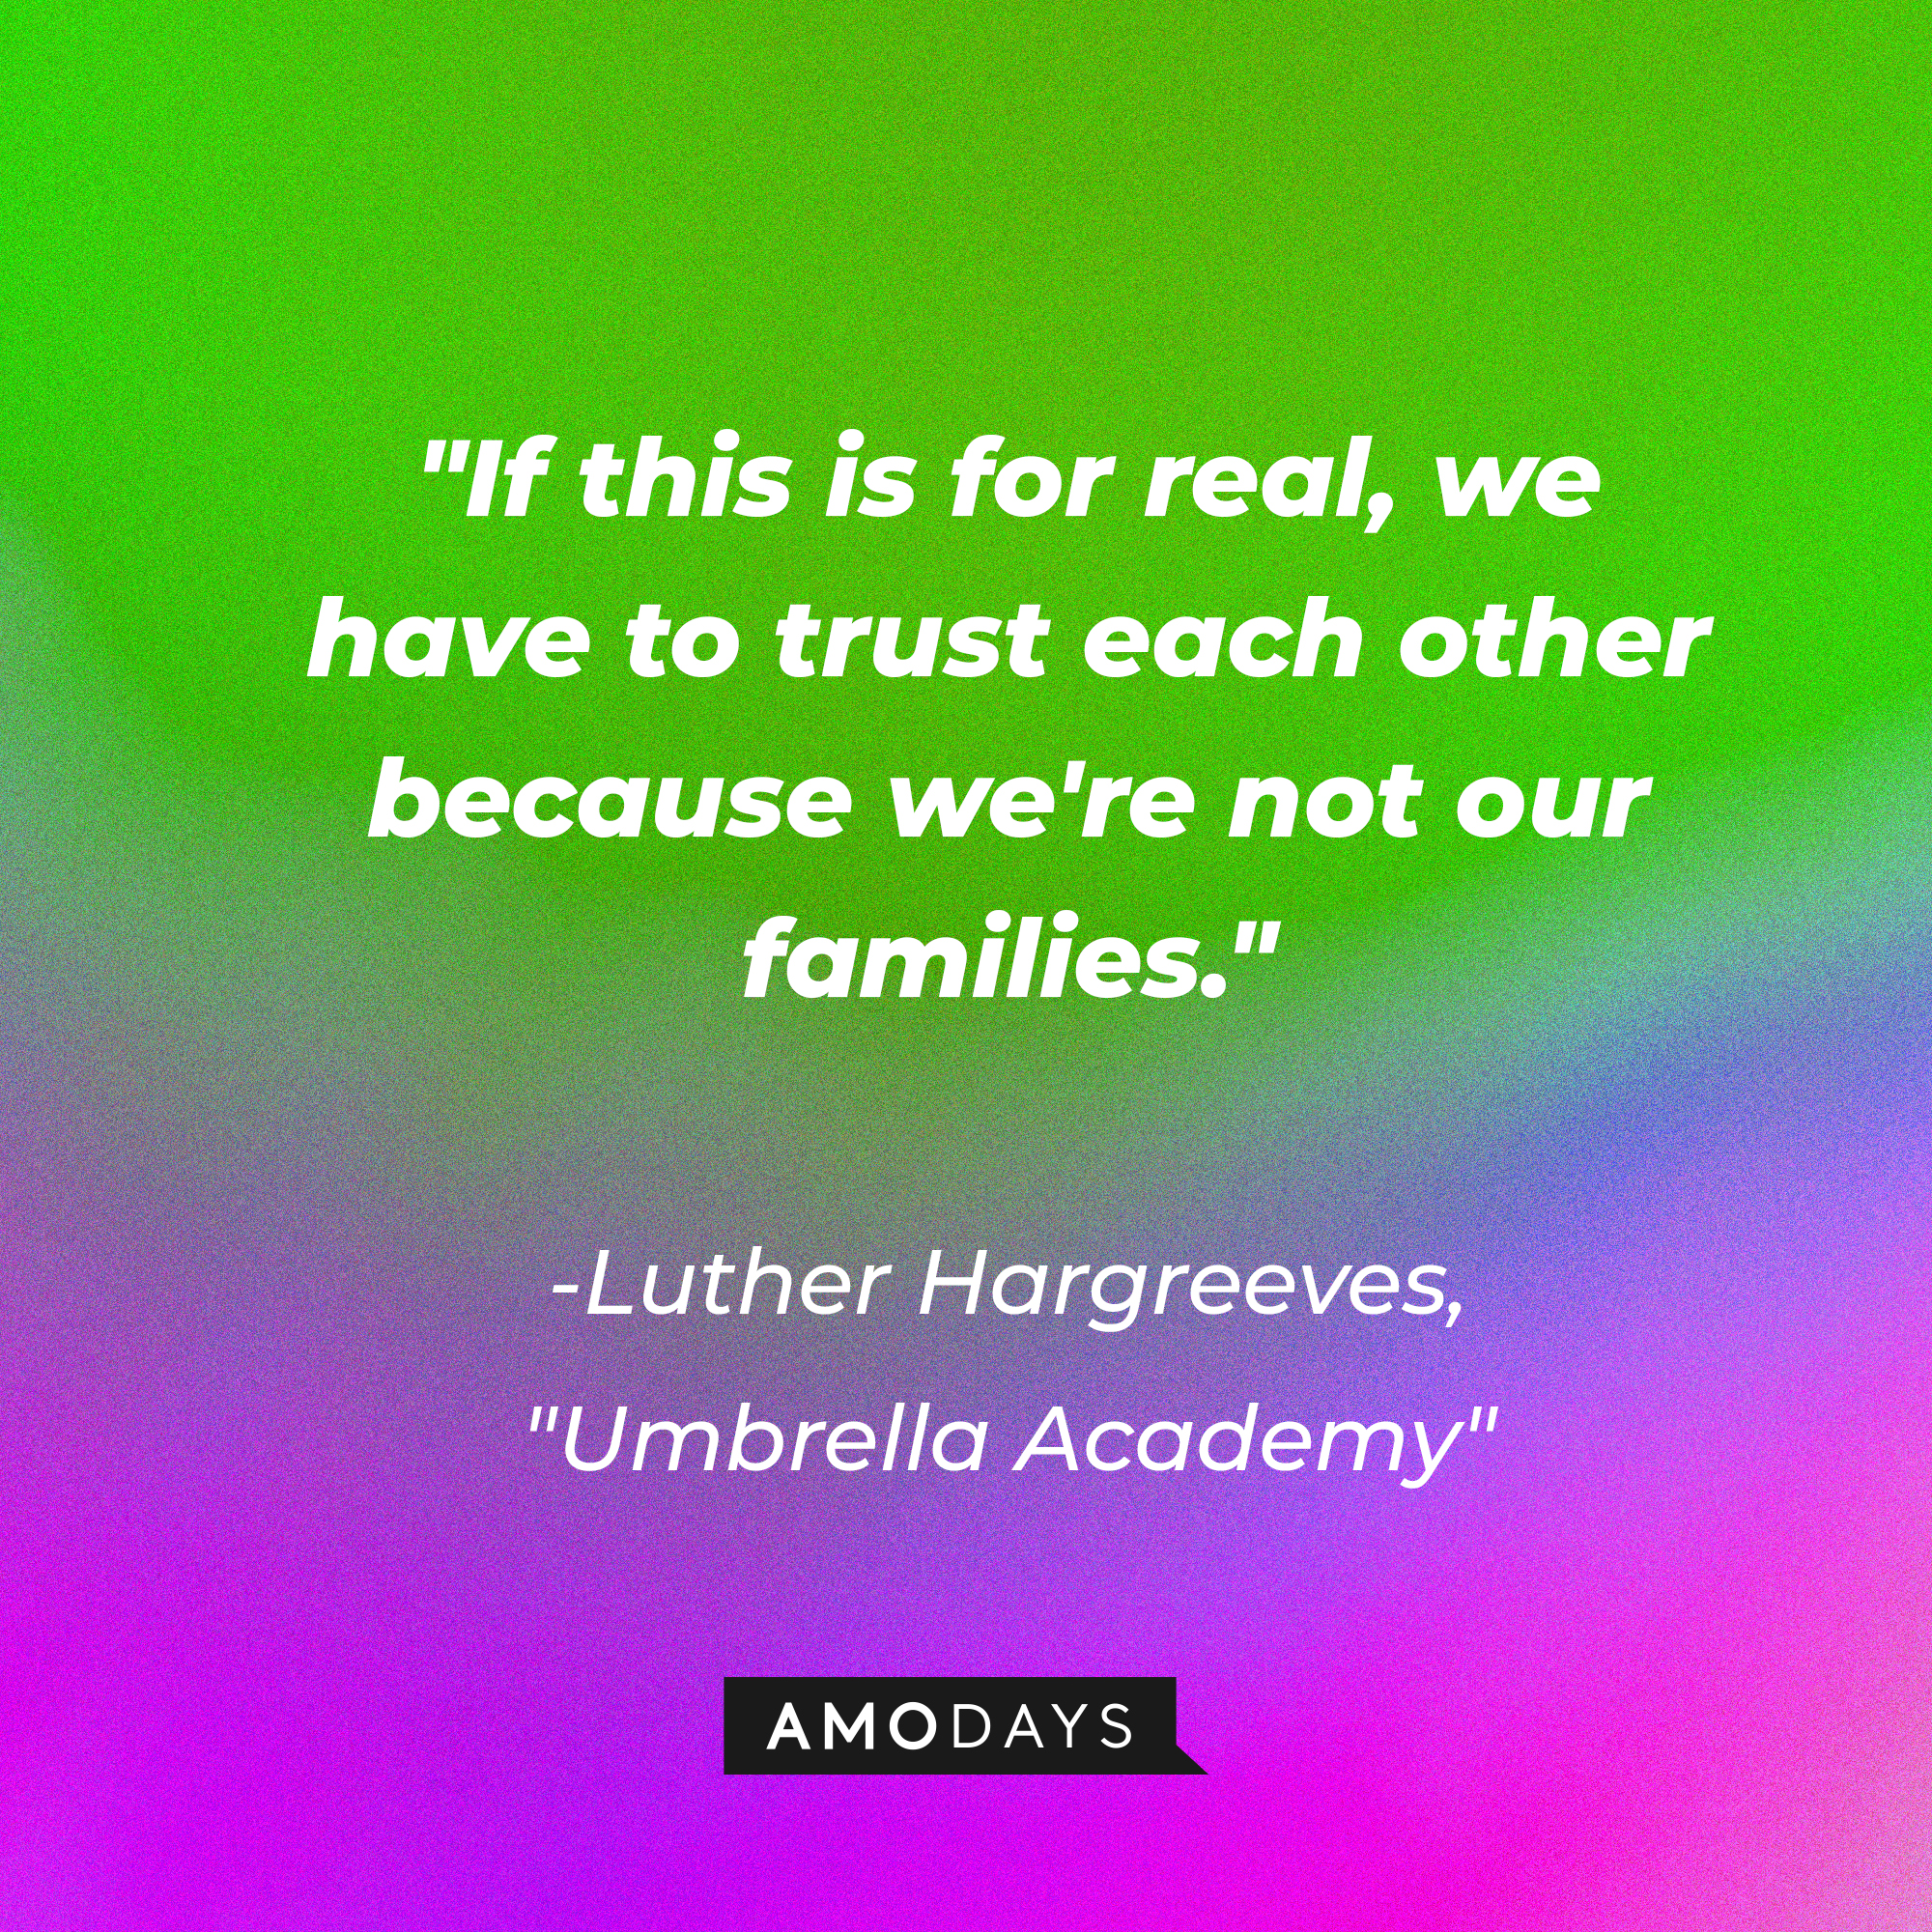 Luther Hargreeves' quote in "The Umbrella Academy:" "If this is for real, we have to trust each other because we're not our families." | Source: AmoDays